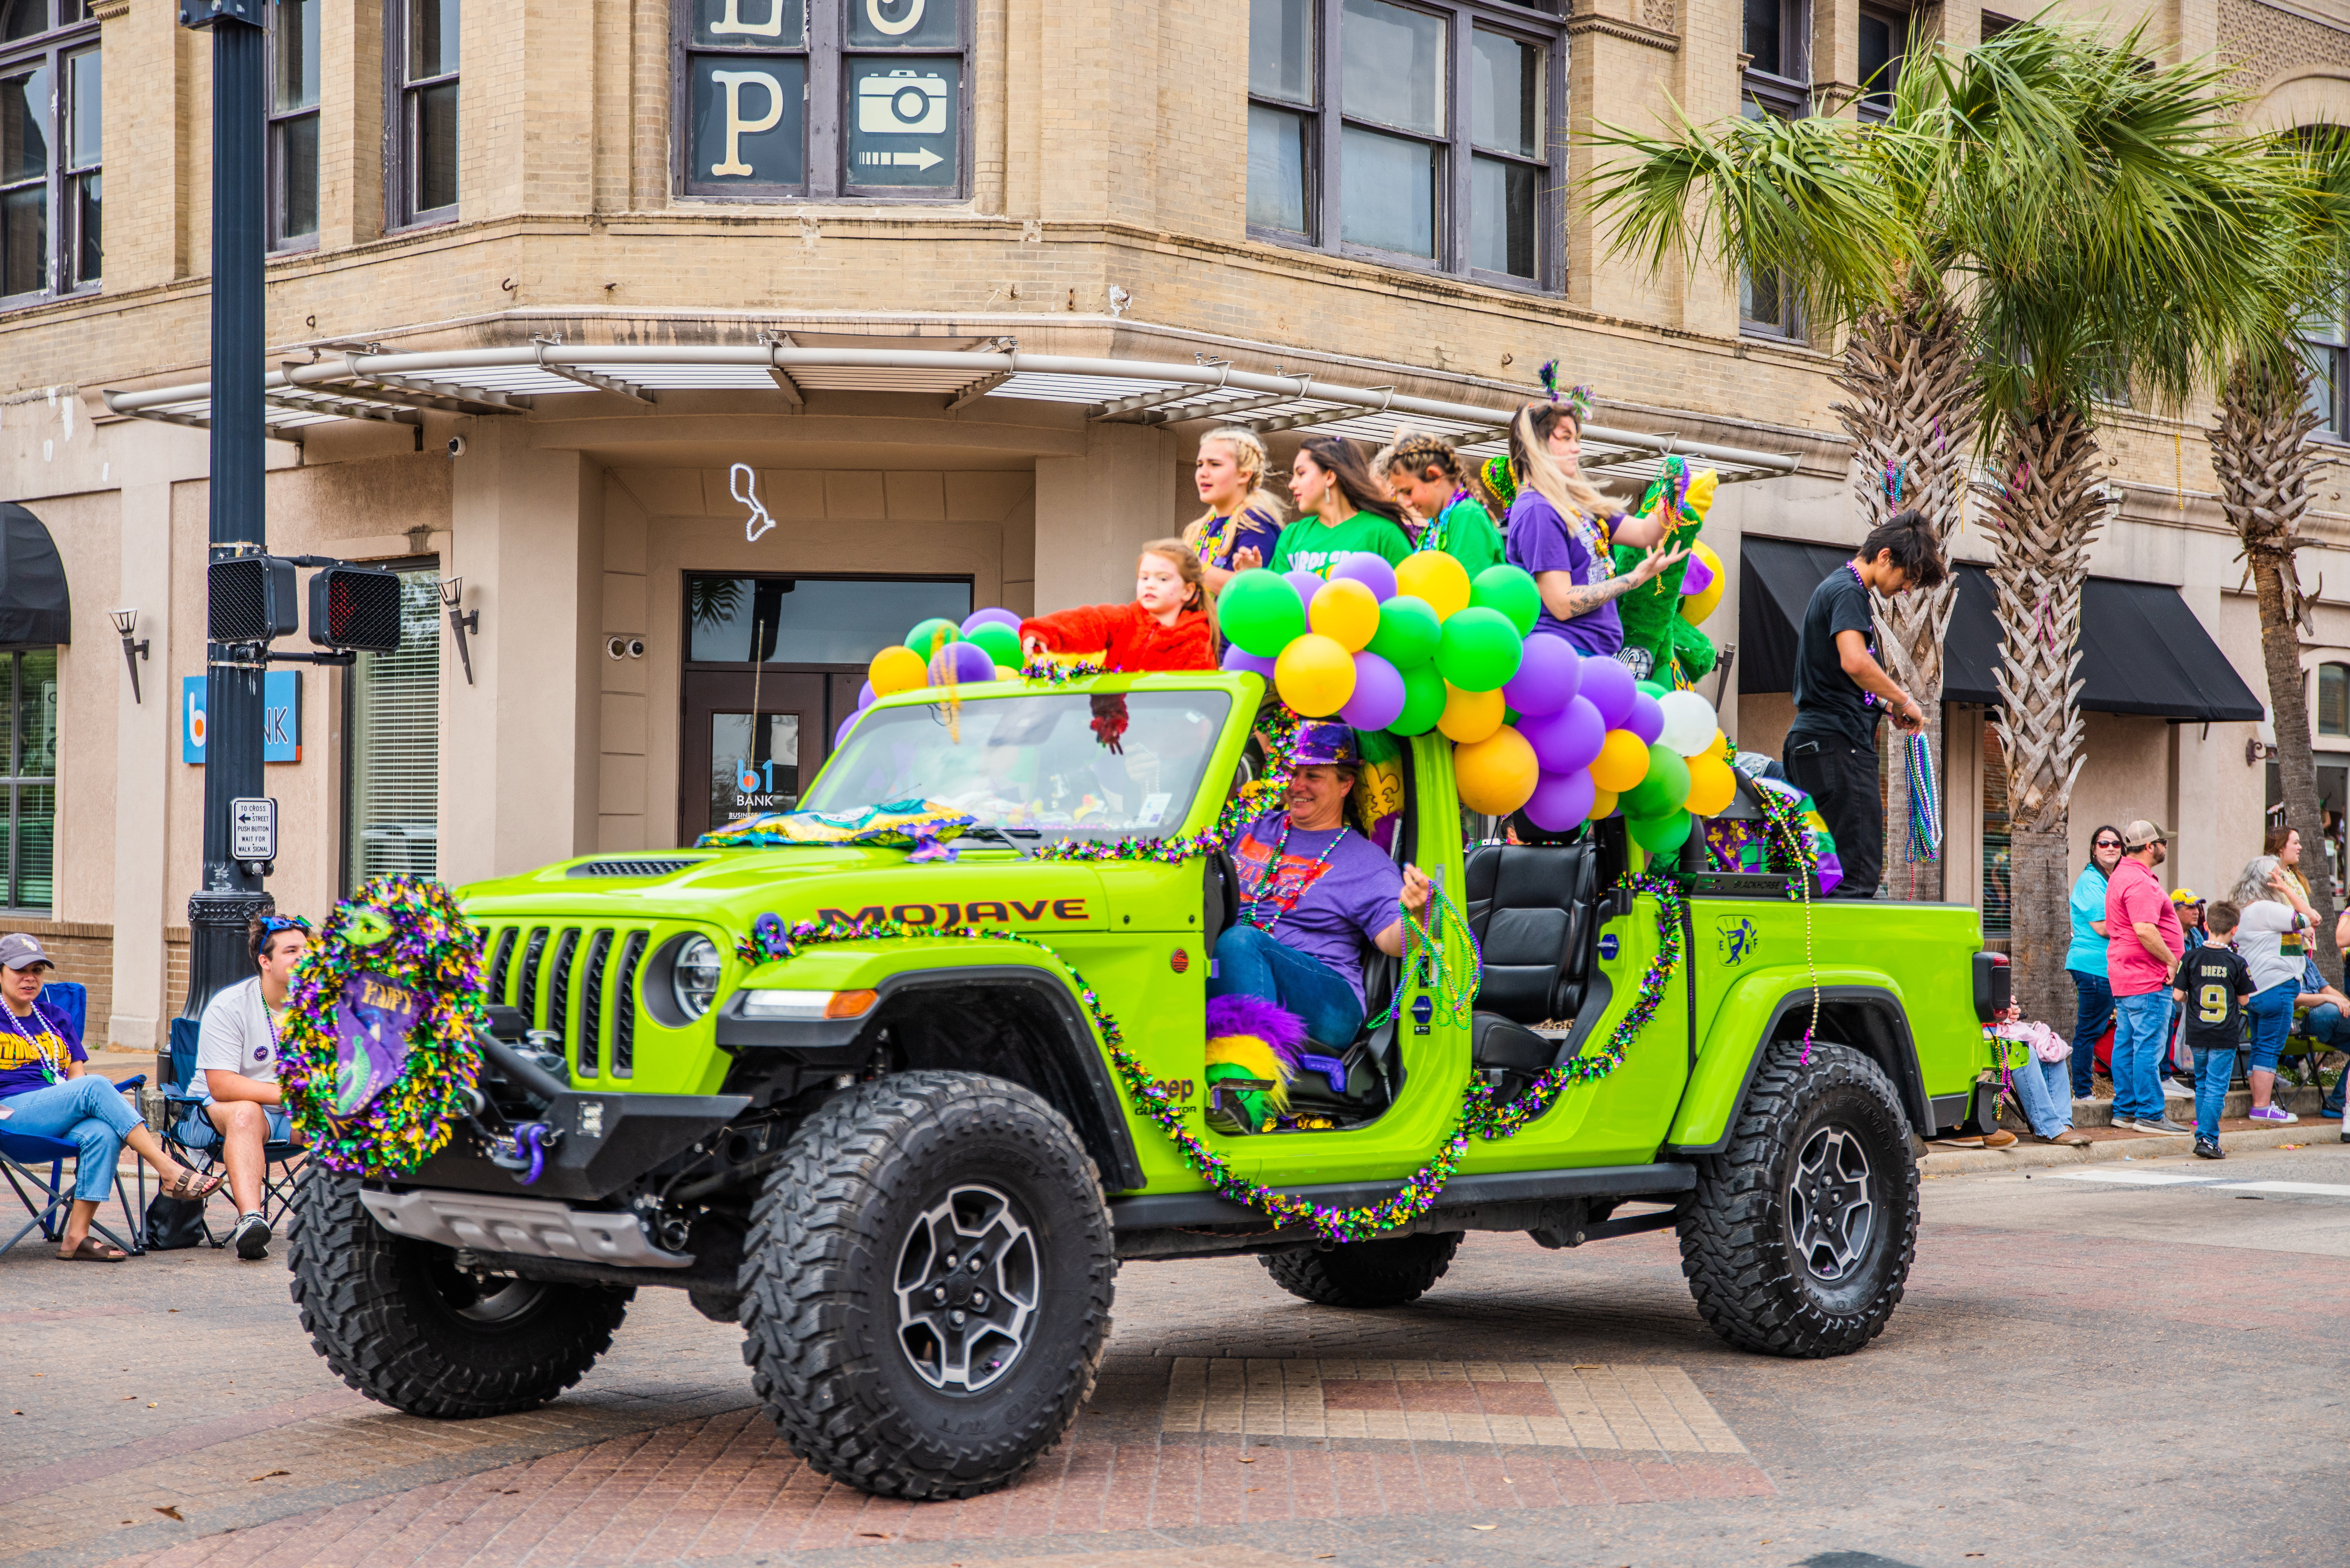 Participants in the Lake Charles Mardi Gras jeep parade